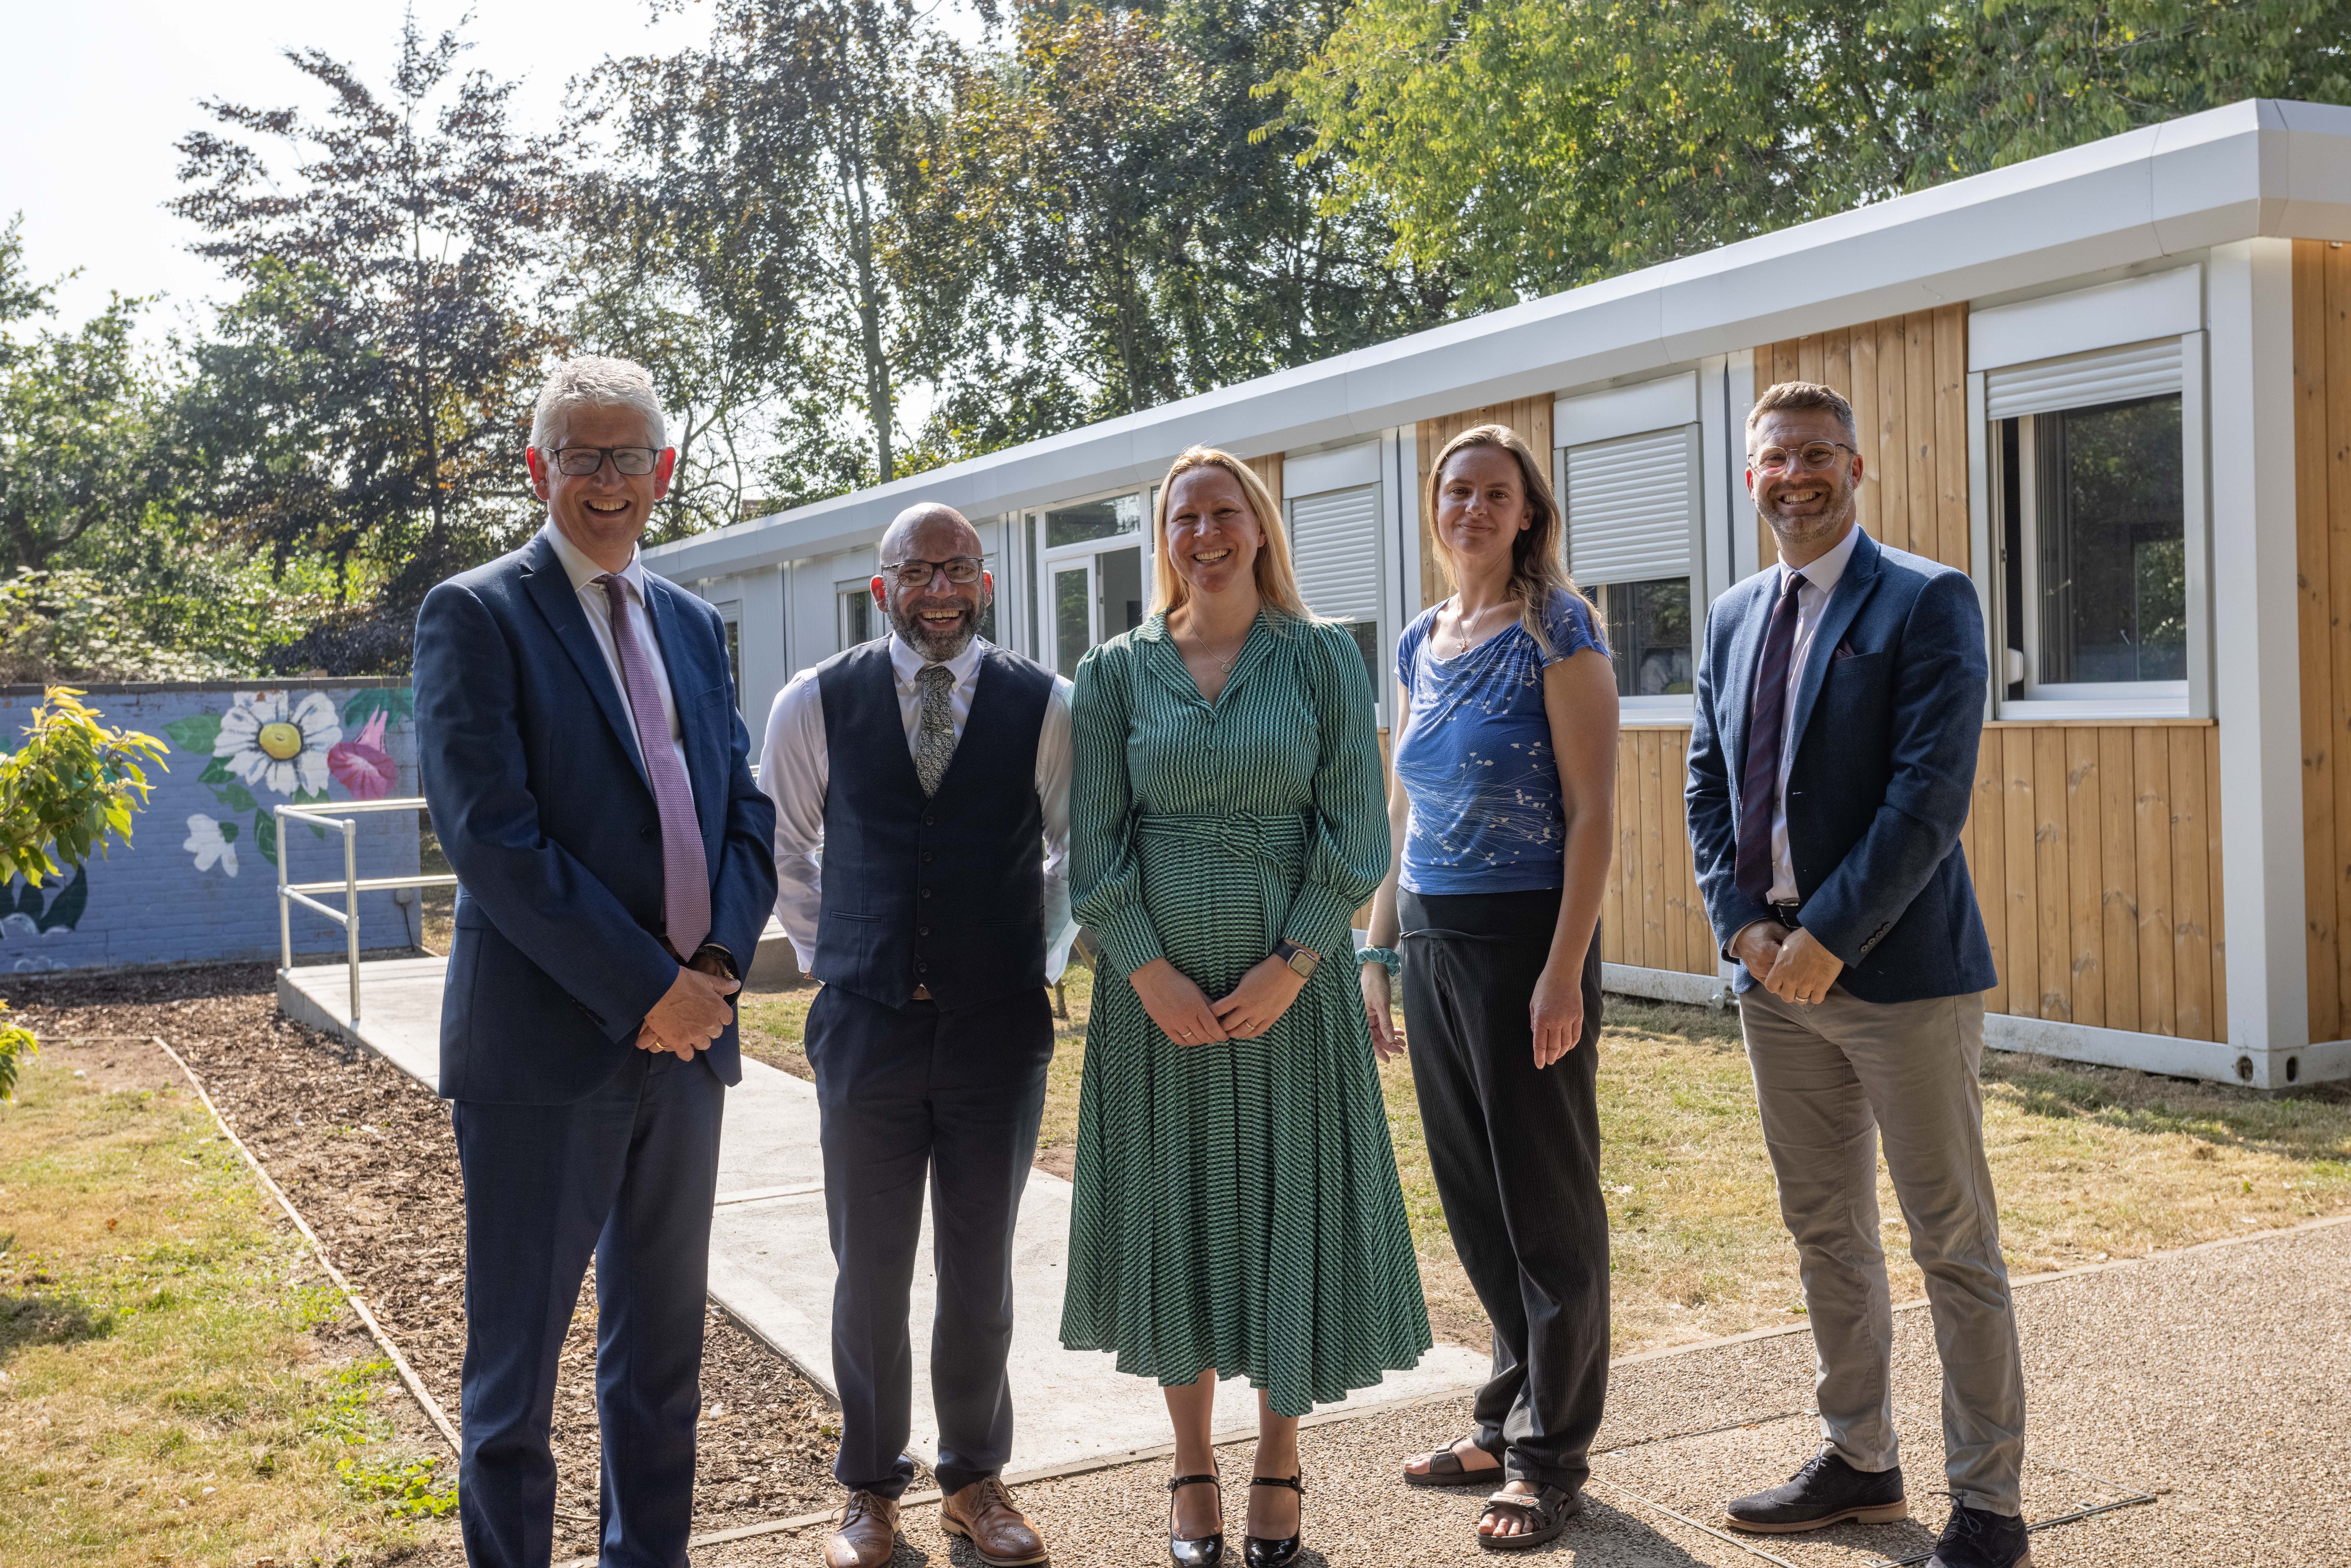 From left, Richard Cranmer – St Benet’s CEO, Mr Gene Miller - Teacher of Nurture, Mrs Carolyn Whittleton - SEND Manager, Ms Ruth Blackledge - Learning Support Assistant, Mr Rob Connelly - Executive Headteacher